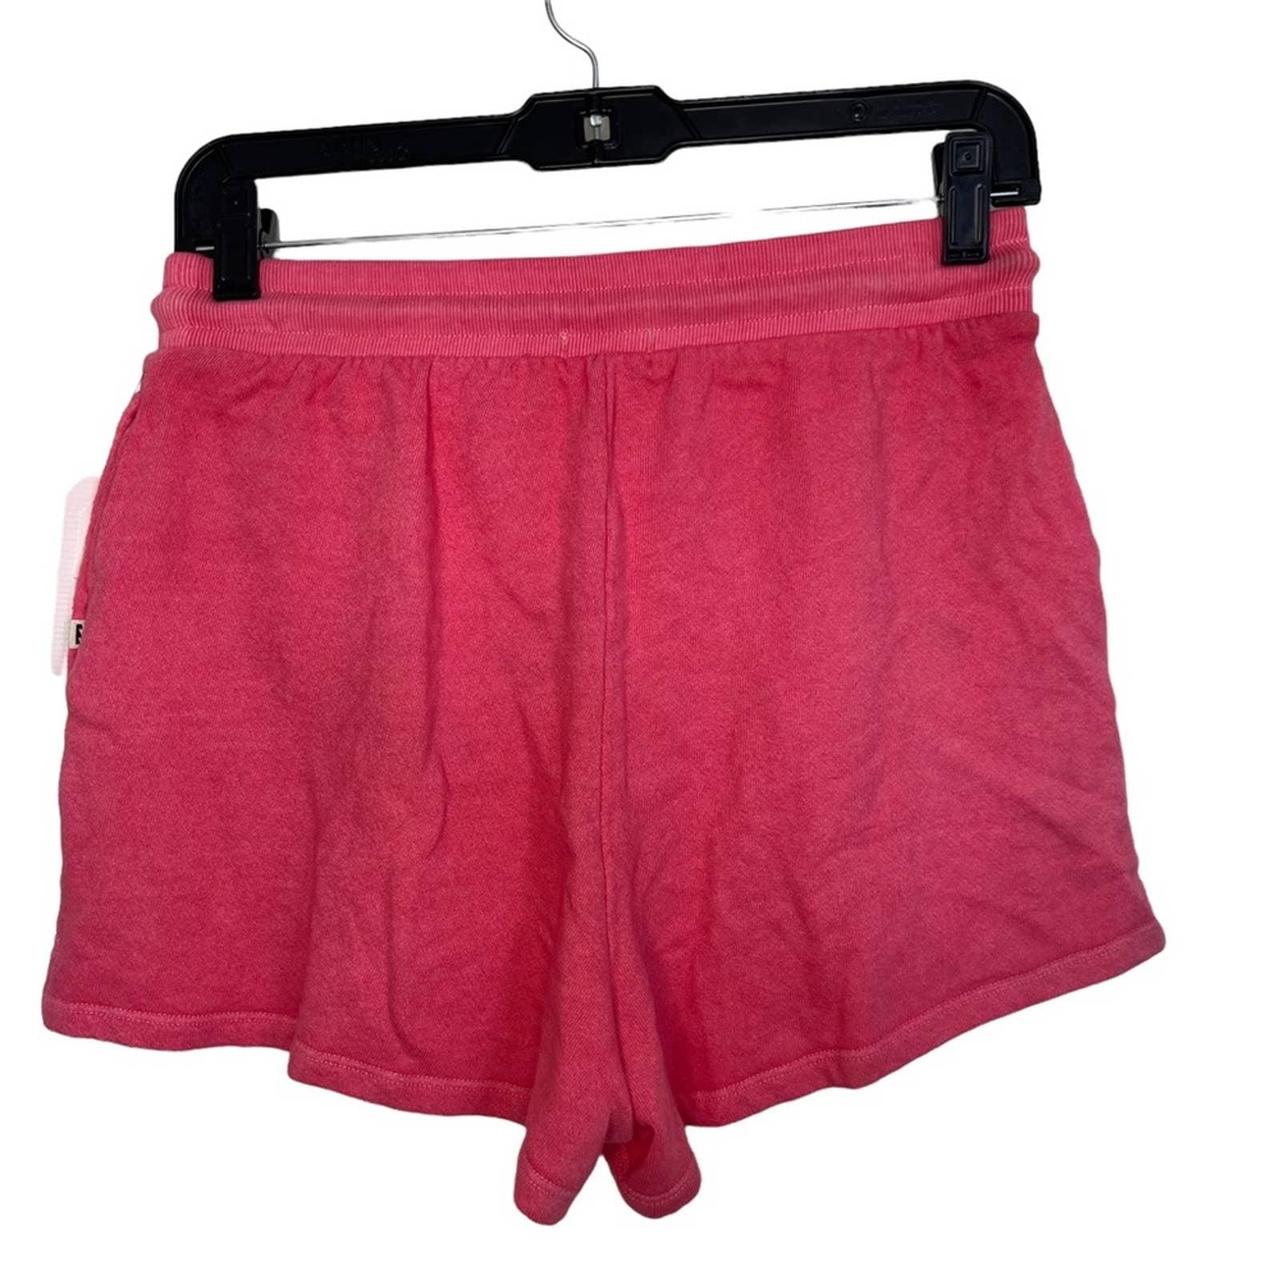 Product Image 2 - New With Tags! Billabong Pink